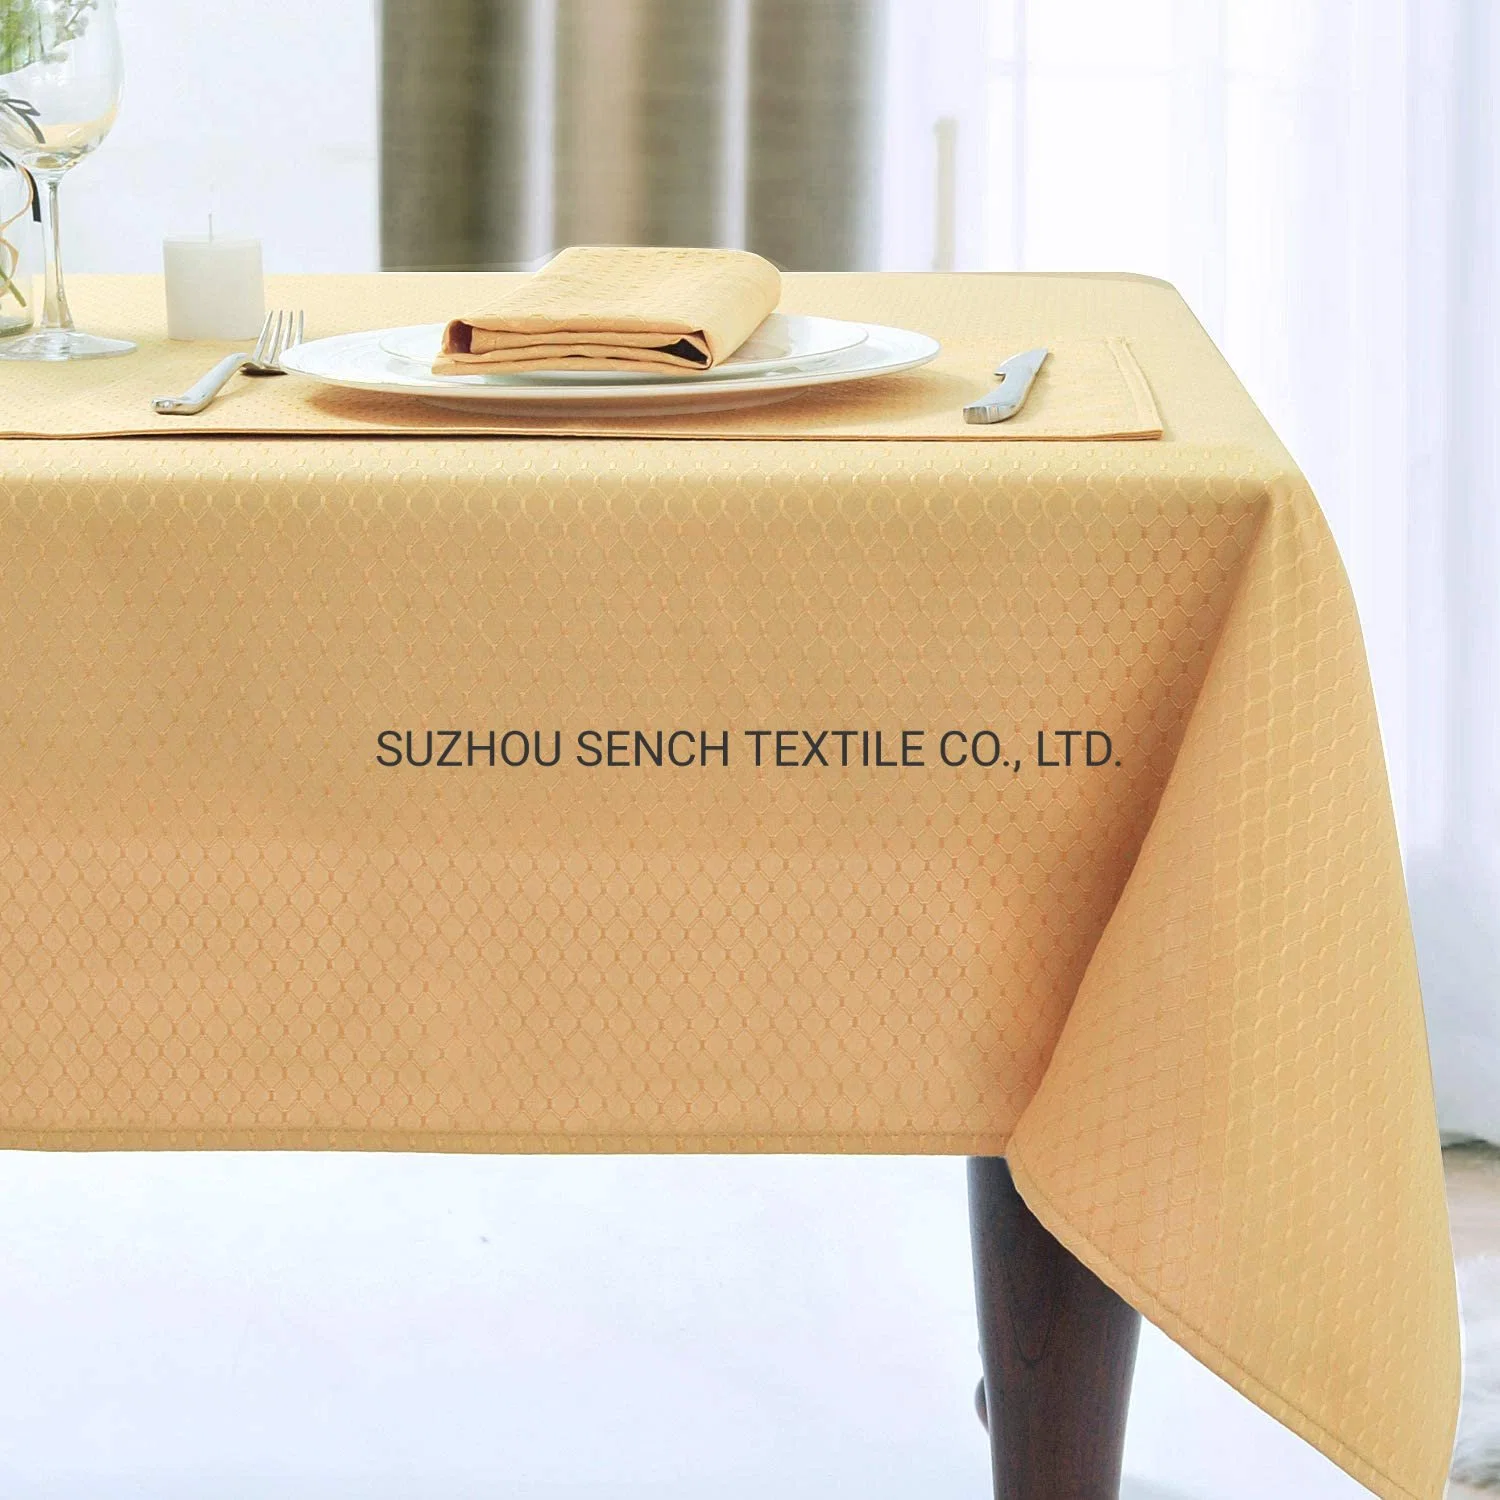 Jacquard Morrocan Rectangle Table Cloth Oil-Proof Spill-Proof and Water Resistance Washable Tablecloth, Decorative Fabric Table Cover for Outdoor and Indoor